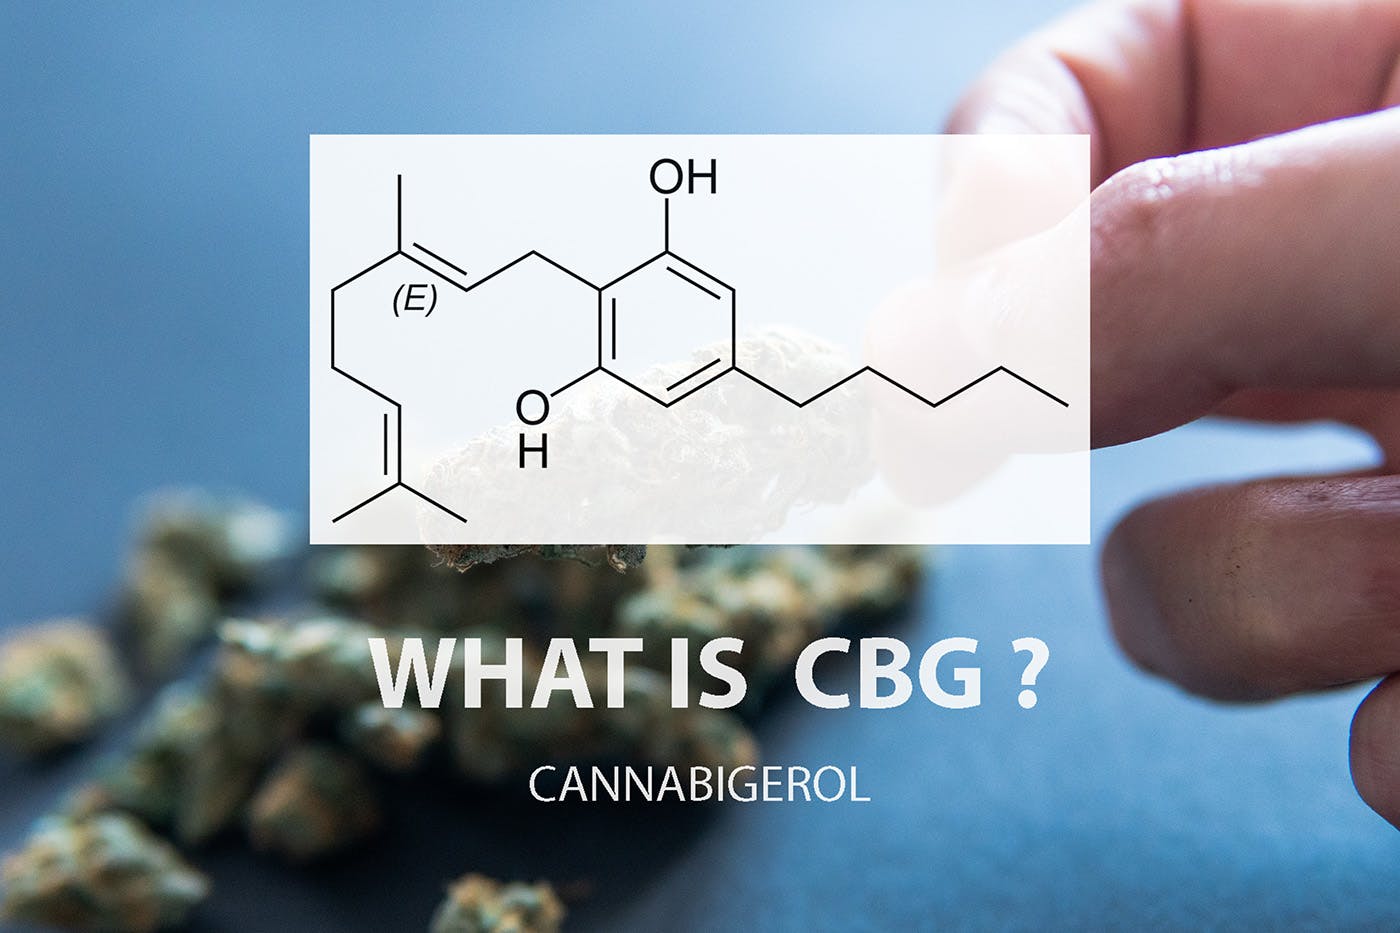 Illustration showing CBG flower with overlay saying "What Is CBG?"